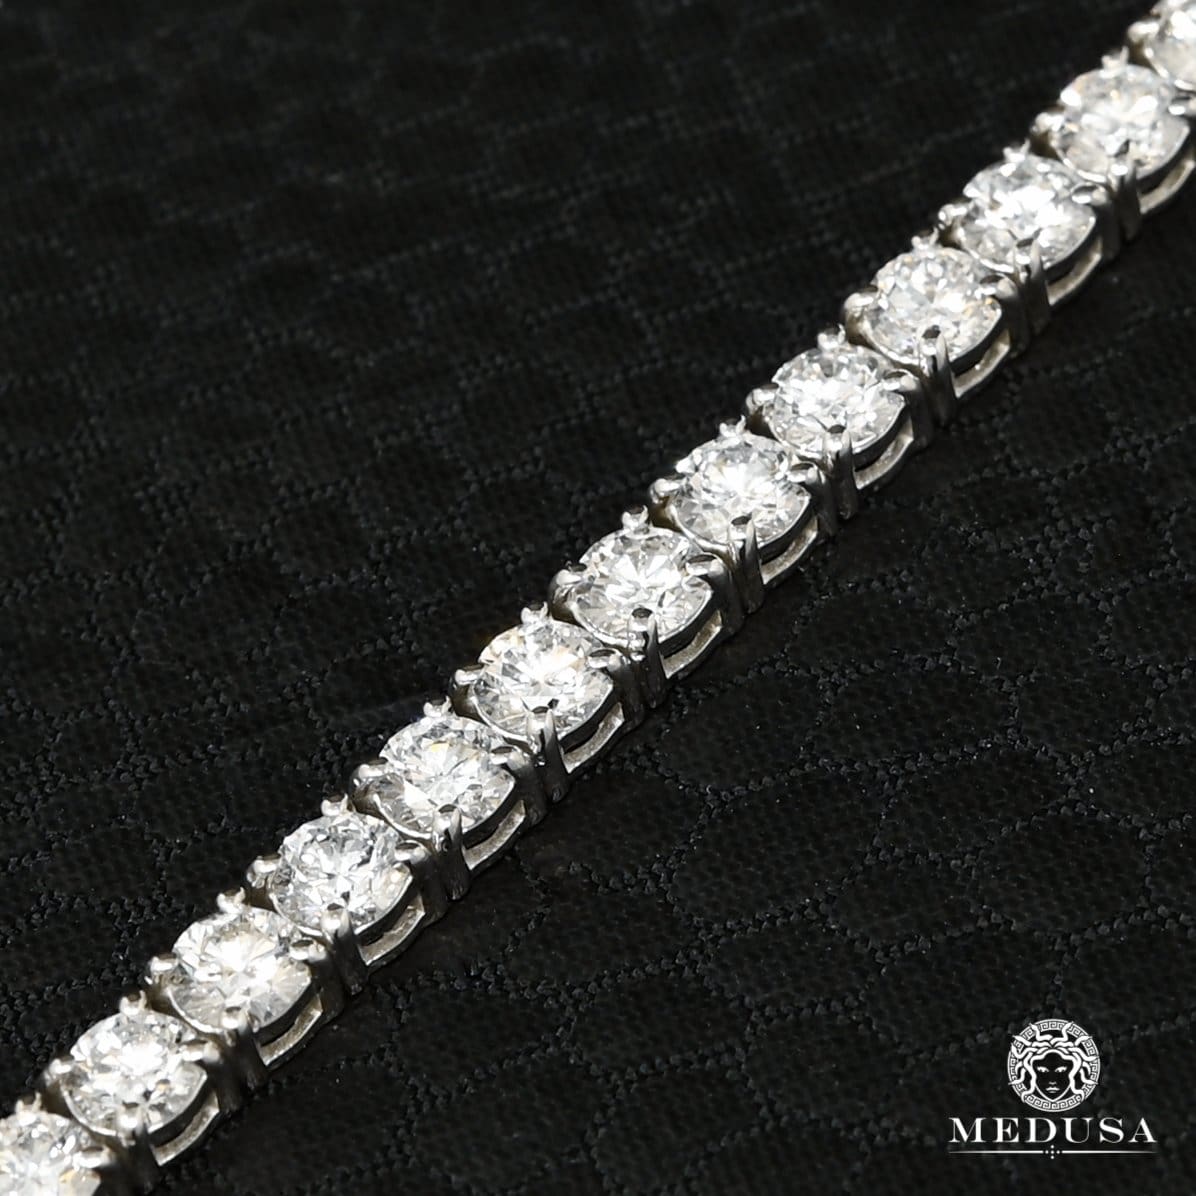 4.40ct Diamond Tennis Bracelet | First State Auctions Canada